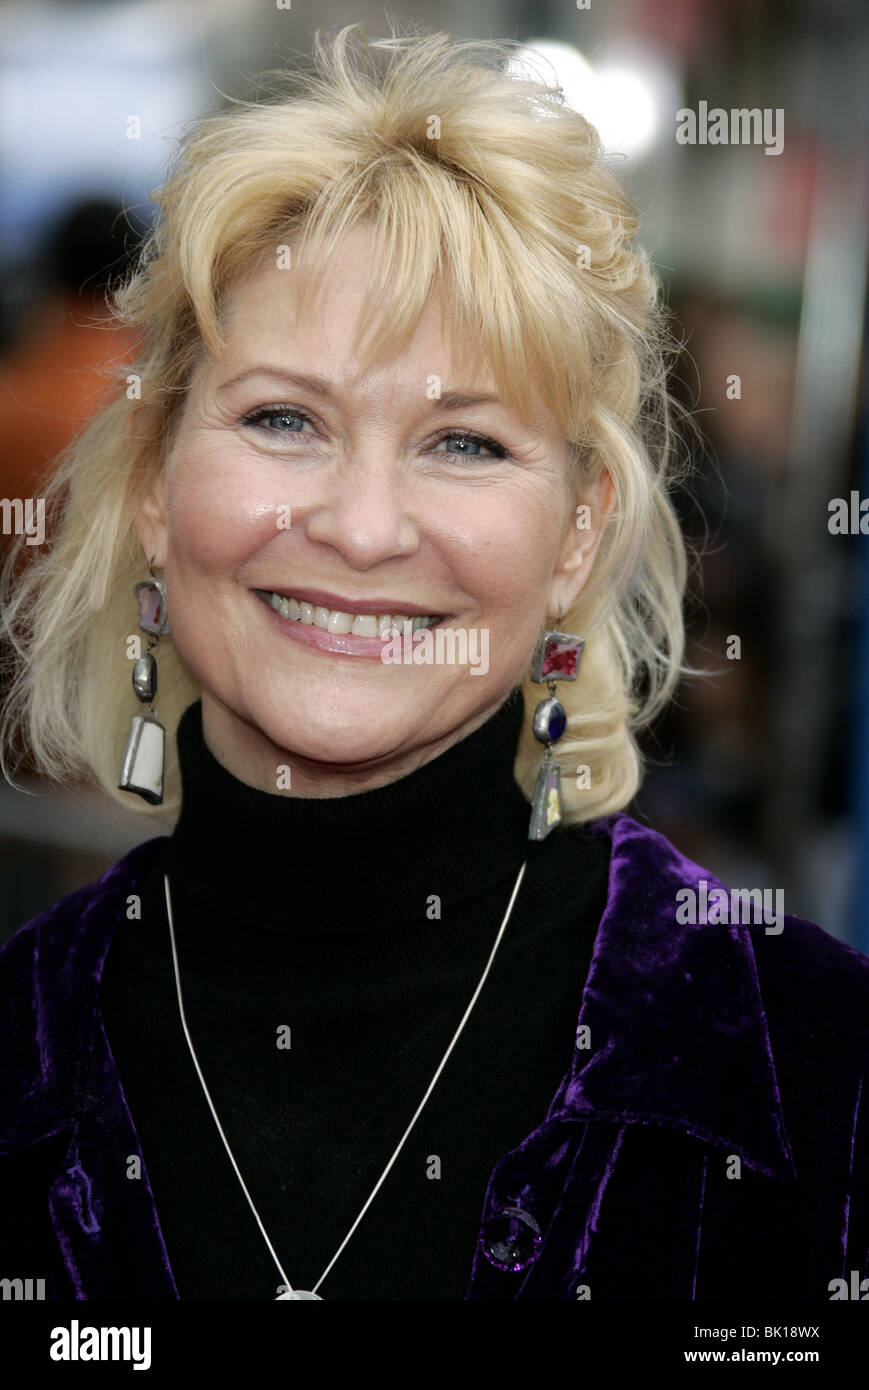 DEE WALLACE STONE RV PREMIERE WESTWOOD LOS ANGELES USA 23 April 2006 Stock Photo